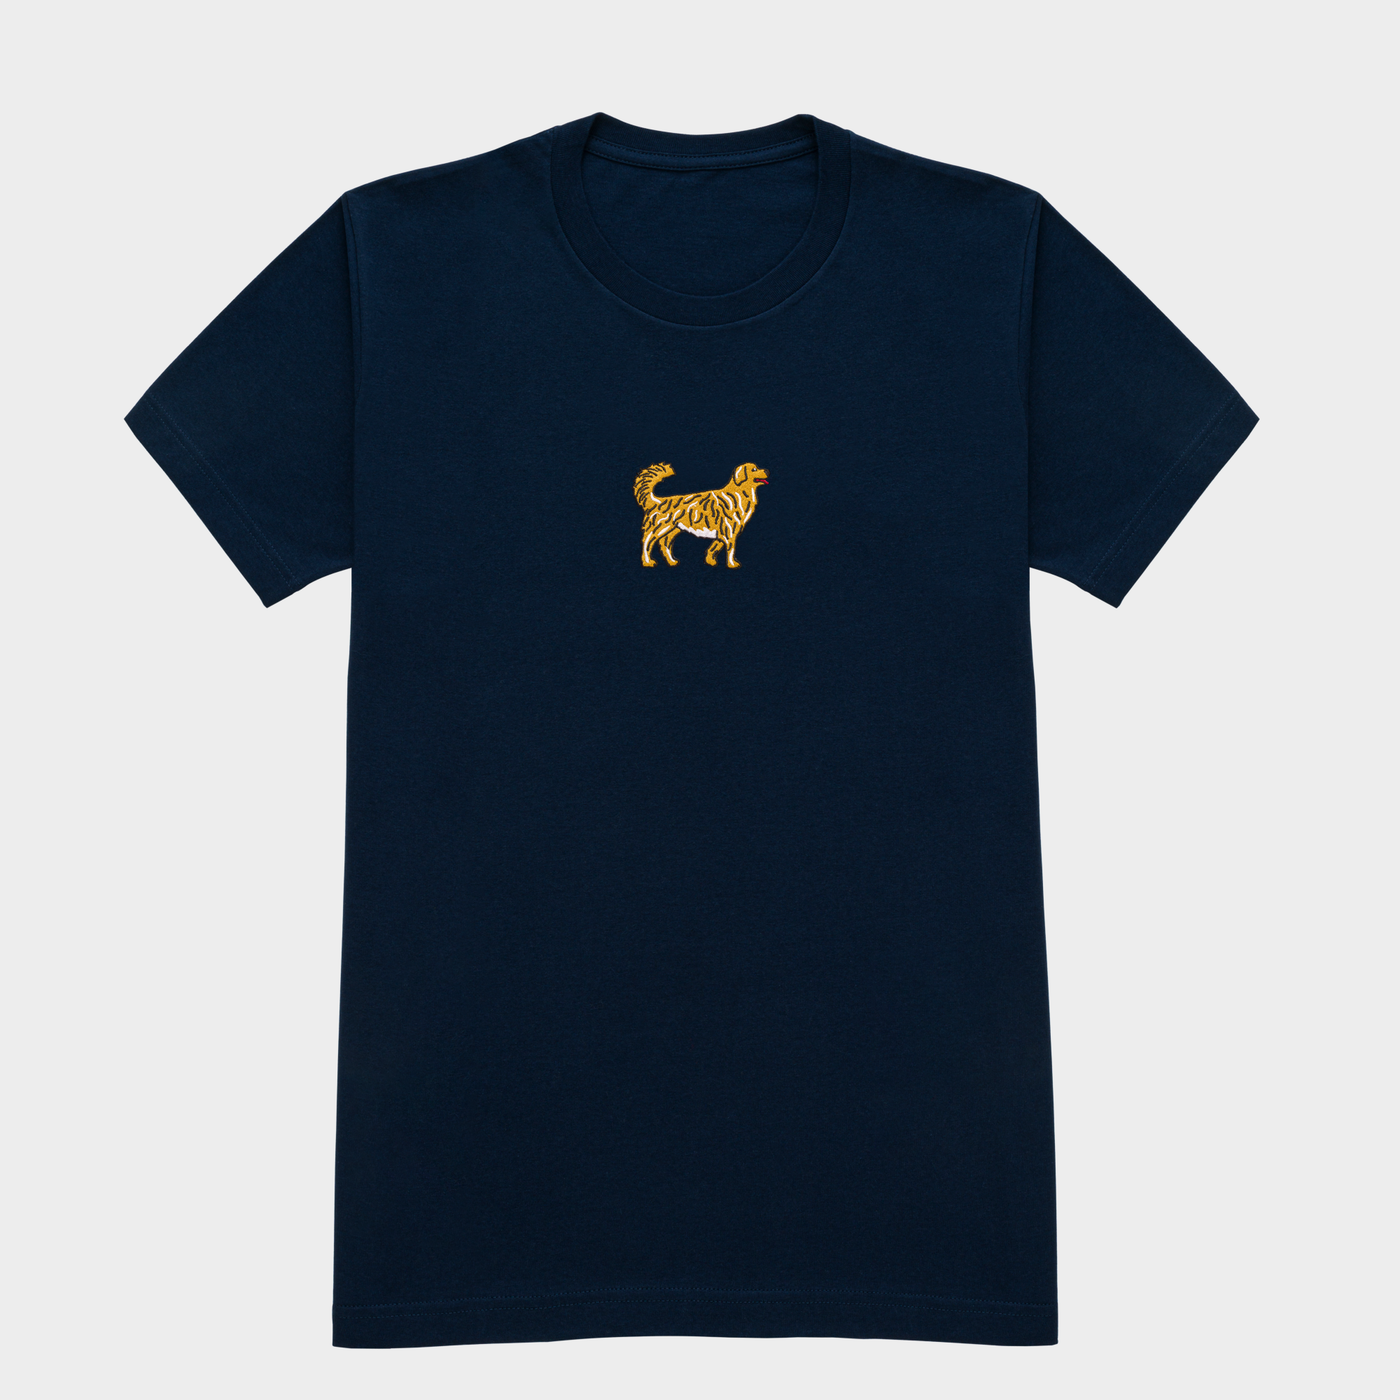 Bobby's Planet Men's Embroidered Golden Retriever T-Shirt from Paws Dog Cat Animals Collection in Navy Color#color_navy